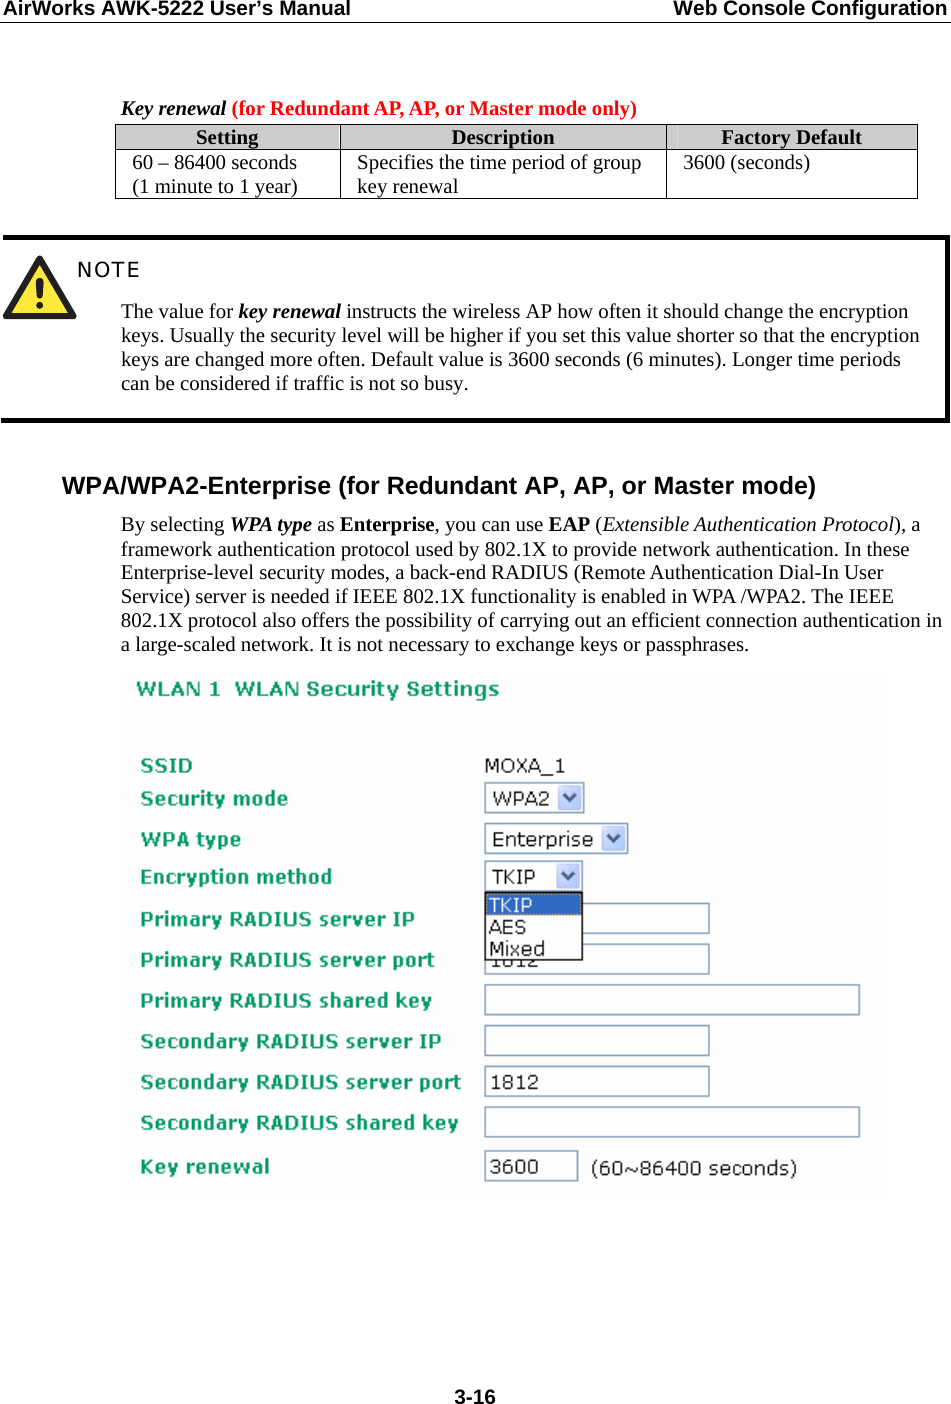 AirWorks AWK-5222 User’s Manual  Web Console Configuration  3-16 Key renewal (for Redundant AP, AP, or Master mode only) Setting  Description  Factory Default 60 – 86400 seconds (1 minute to 1 year)  Specifies the time period of group key renewal  3600 (seconds)   NOTE The value for key renewal instructs the wireless AP how often it should change the encryption keys. Usually the security level will be higher if you set this value shorter so that the encryption keys are changed more often. Default value is 3600 seconds (6 minutes). Longer time periods can be considered if traffic is not so busy.  WPA/WPA2-Enterprise (for Redundant AP, AP, or Master mode) By selecting WPA type as Enterprise, you can use EAP (Extensible Authentication Protocol), a framework authentication protocol used by 802.1X to provide network authentication. In these Enterprise-level security modes, a back-end RADIUS (Remote Authentication Dial-In User Service) server is needed if IEEE 802.1X functionality is enabled in WPA /WPA2. The IEEE 802.1X protocol also offers the possibility of carrying out an efficient connection authentication in a large-scaled network. It is not necessary to exchange keys or passphrases.      